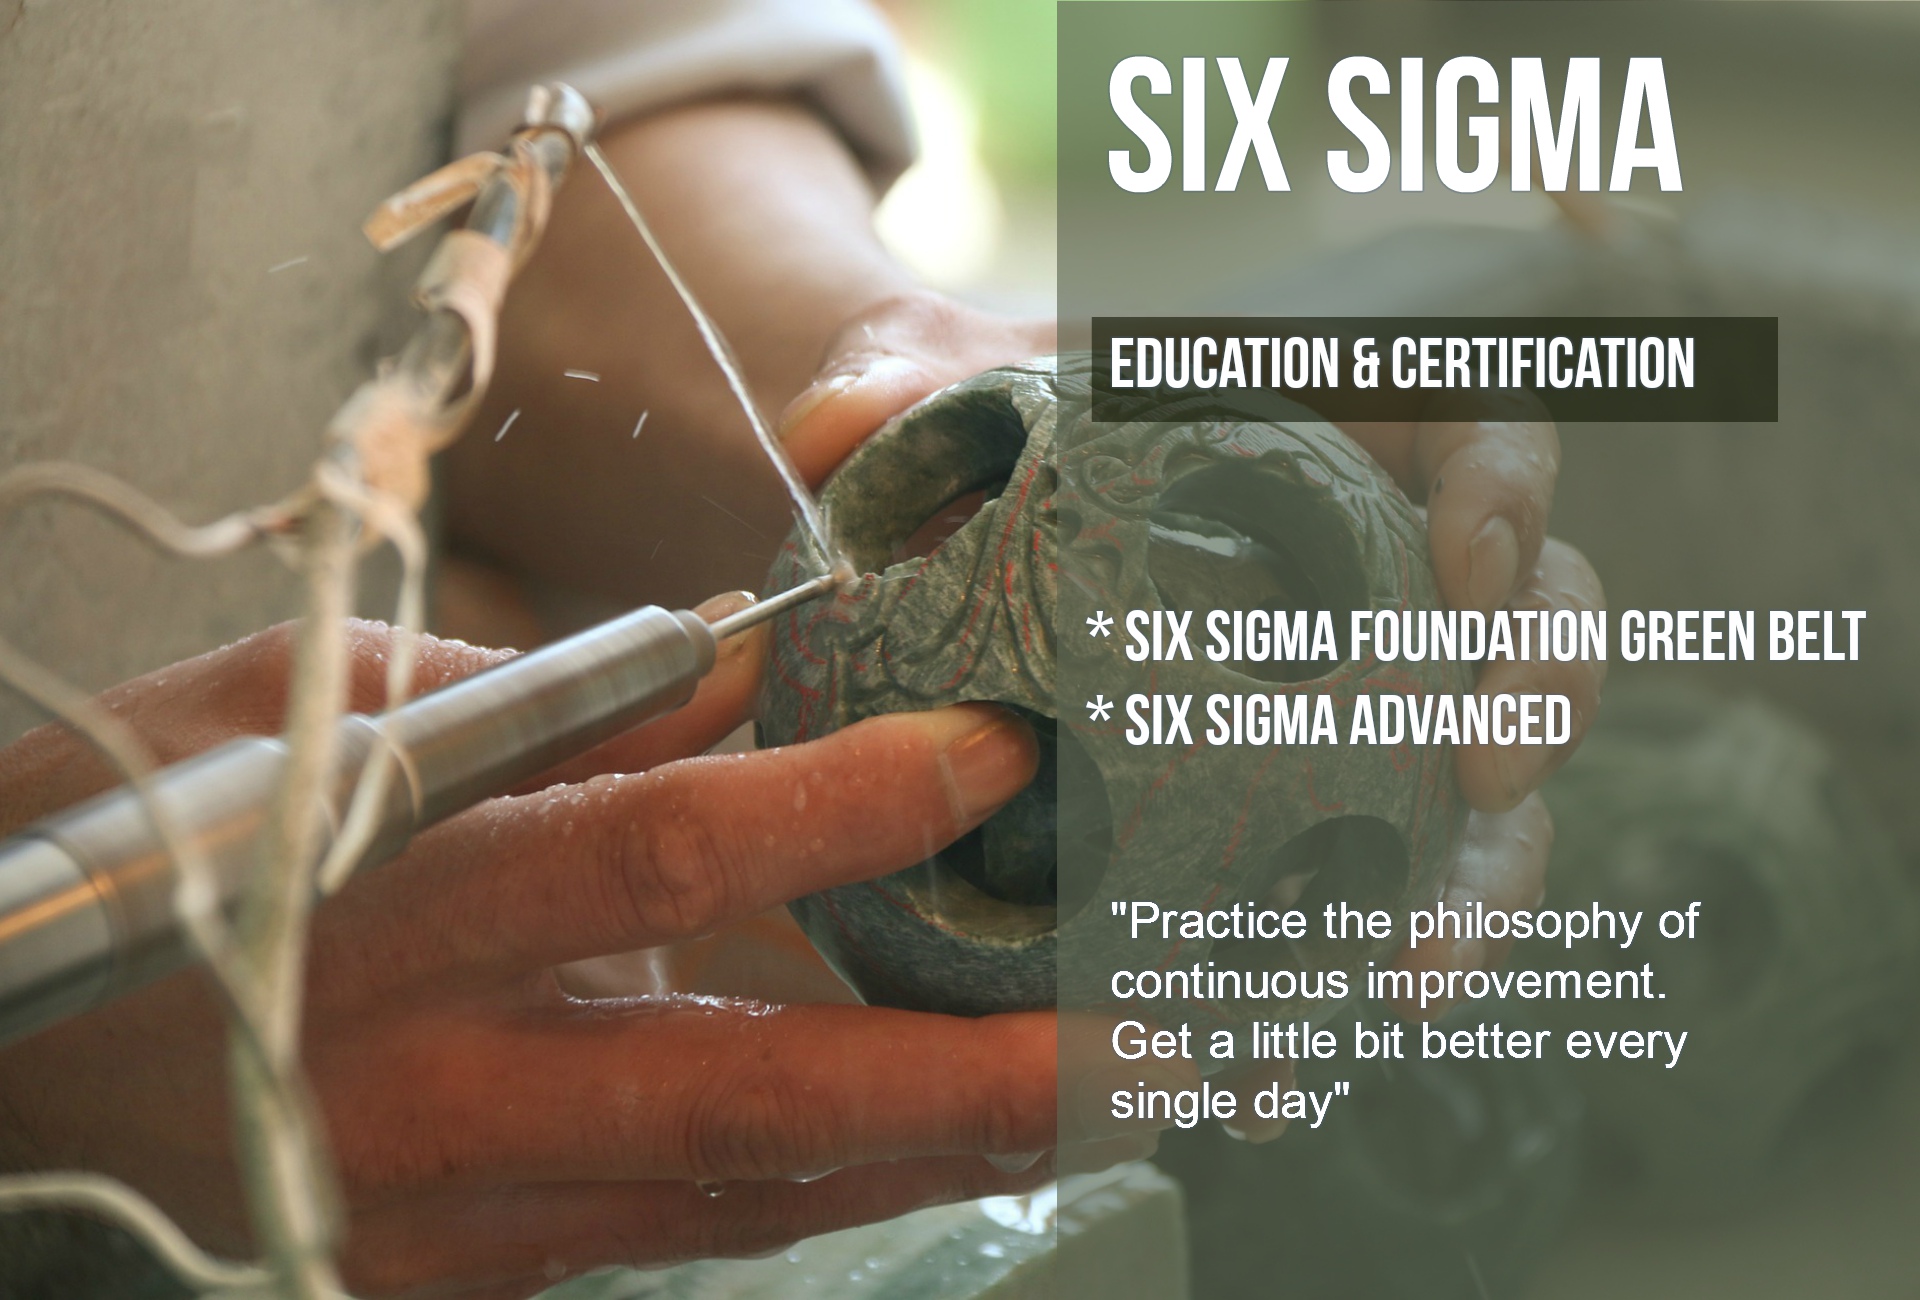 ITS Partner - Education - Six Sigma Education and certification